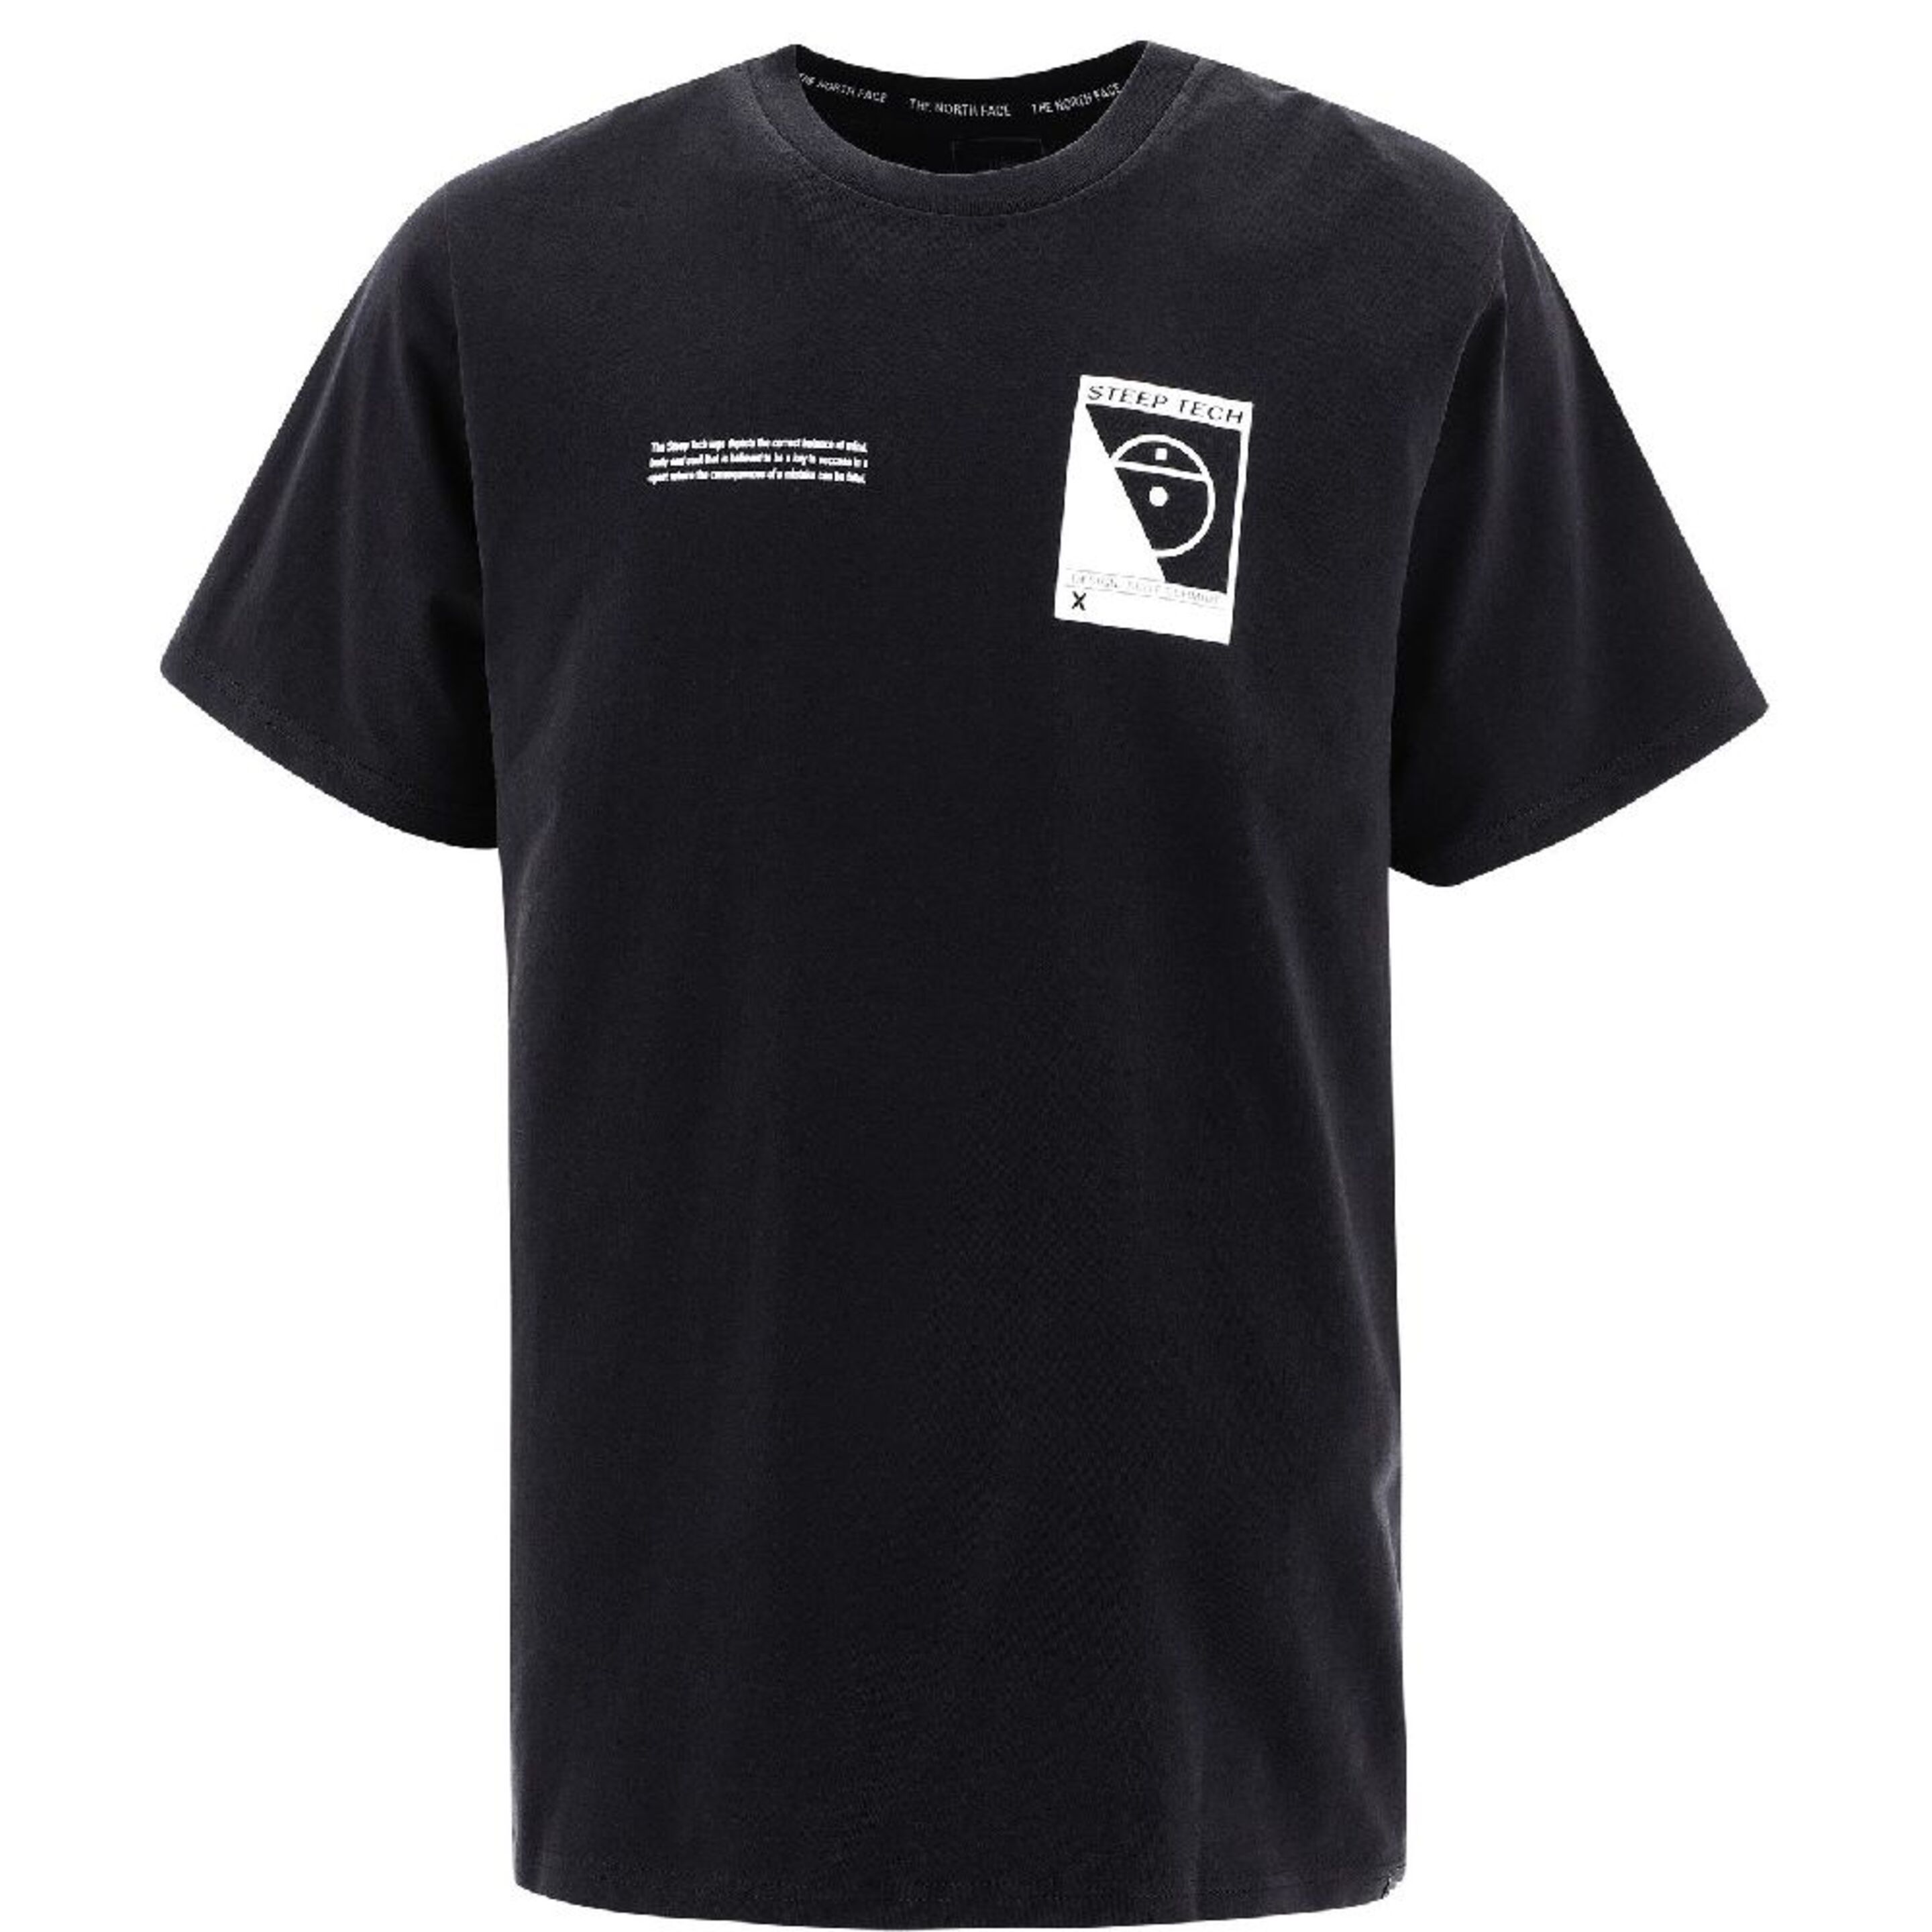 Camiseta The North Face Nf0a4746jk31